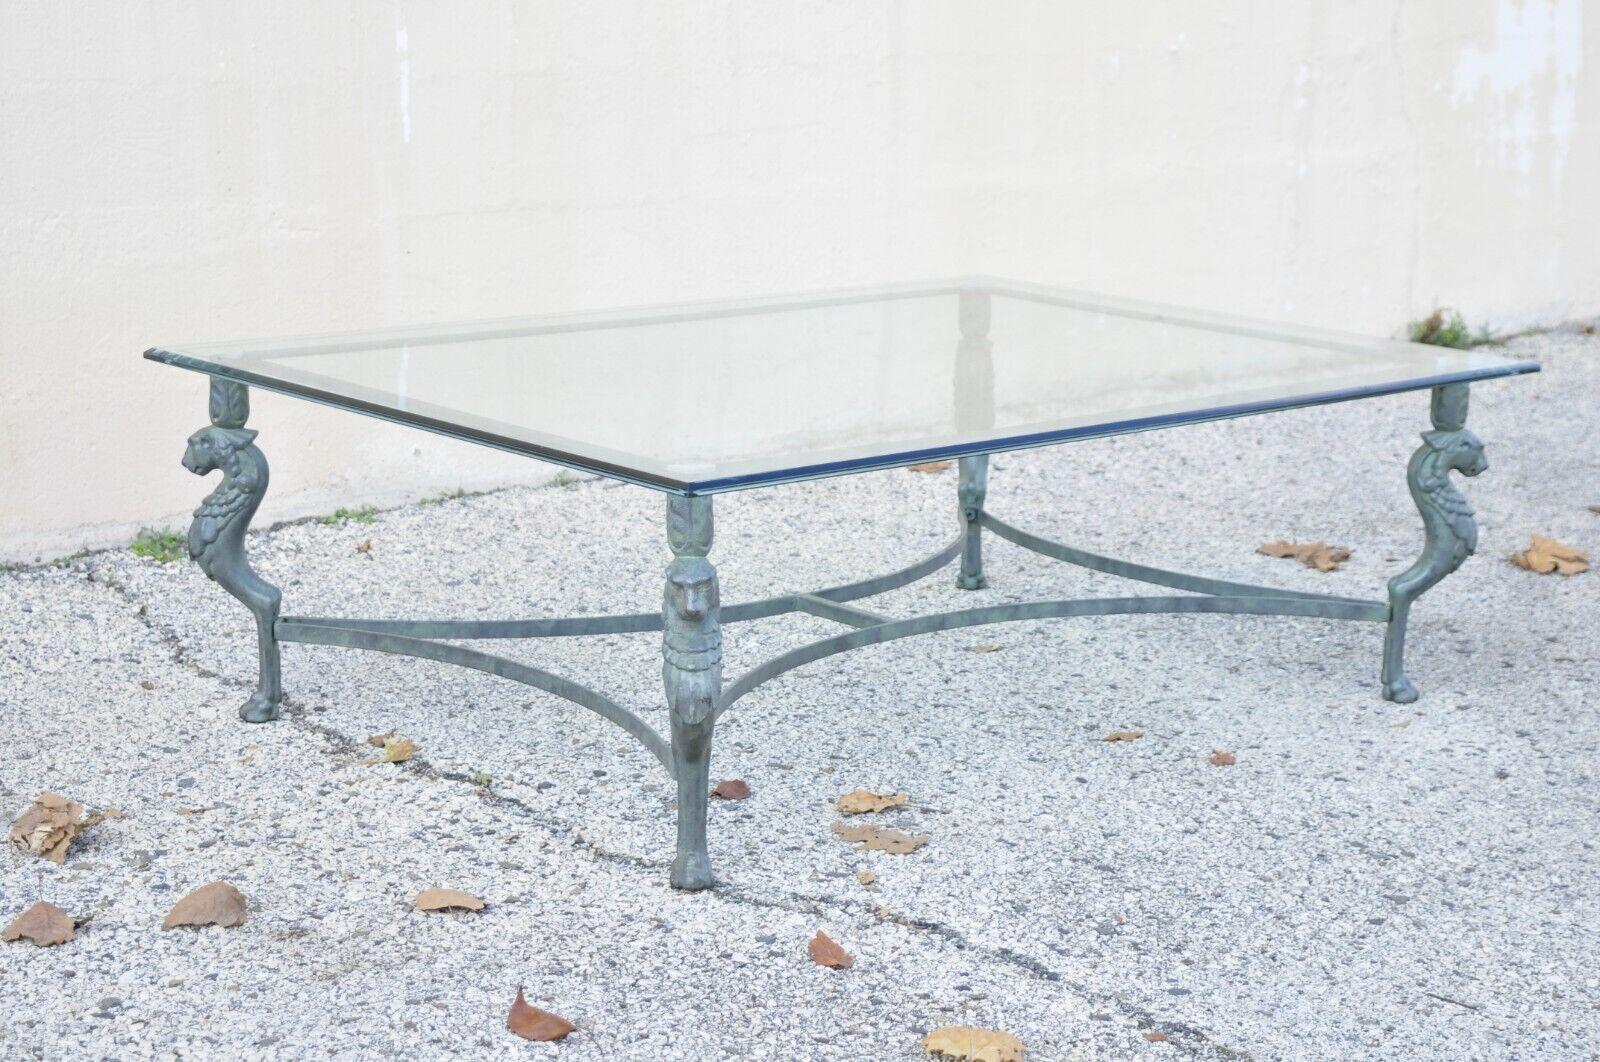 Vintage Regency Neoclassical style green iron and glass lion coffee table. Item features figural lion form legs with paw feet, green distress painted finish, wrought cast iron construction, beveled glass top, very nice vintage item, great style and